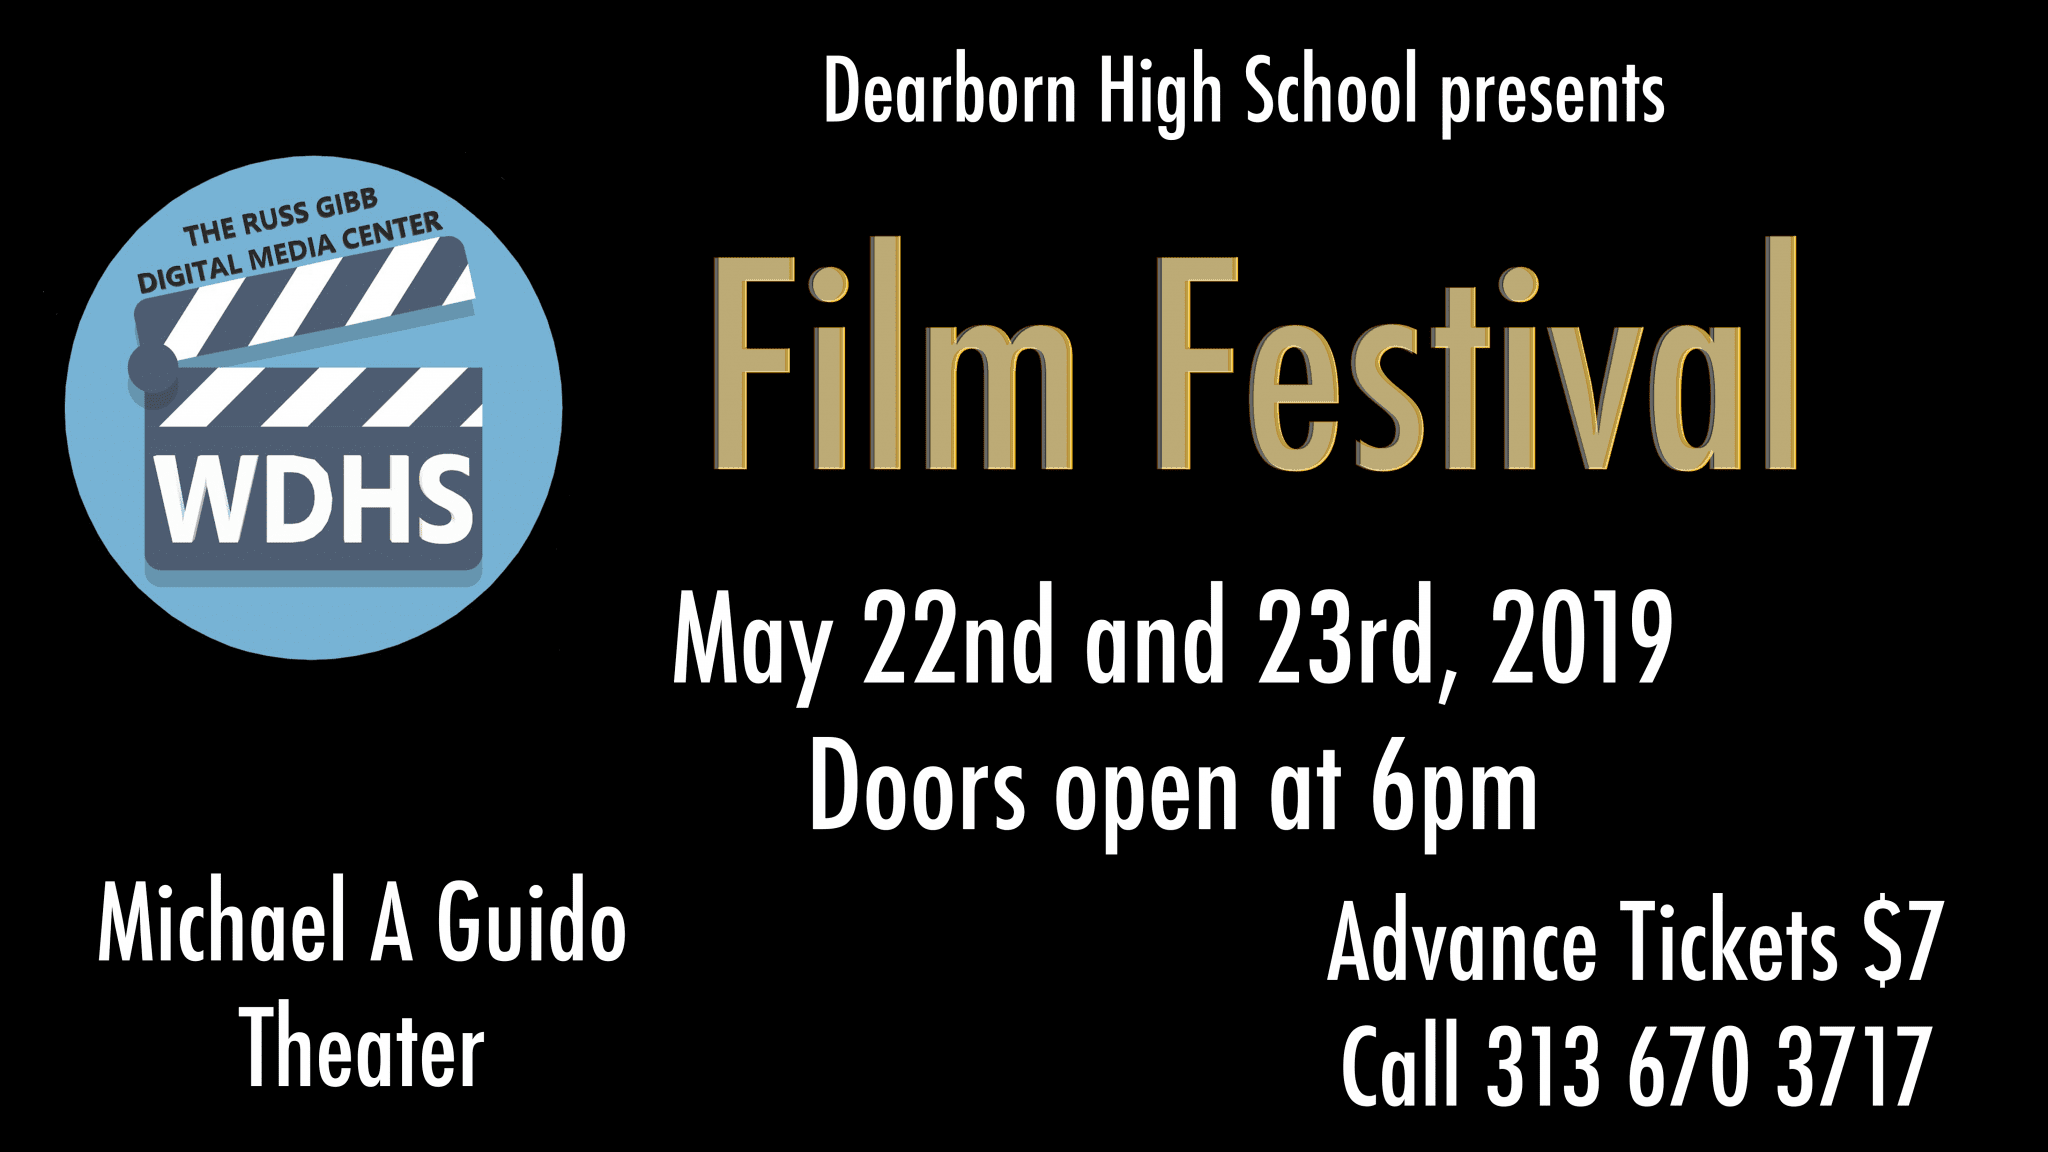 Dearborn High School presents Film Festival- May 22 and May 23, 2019